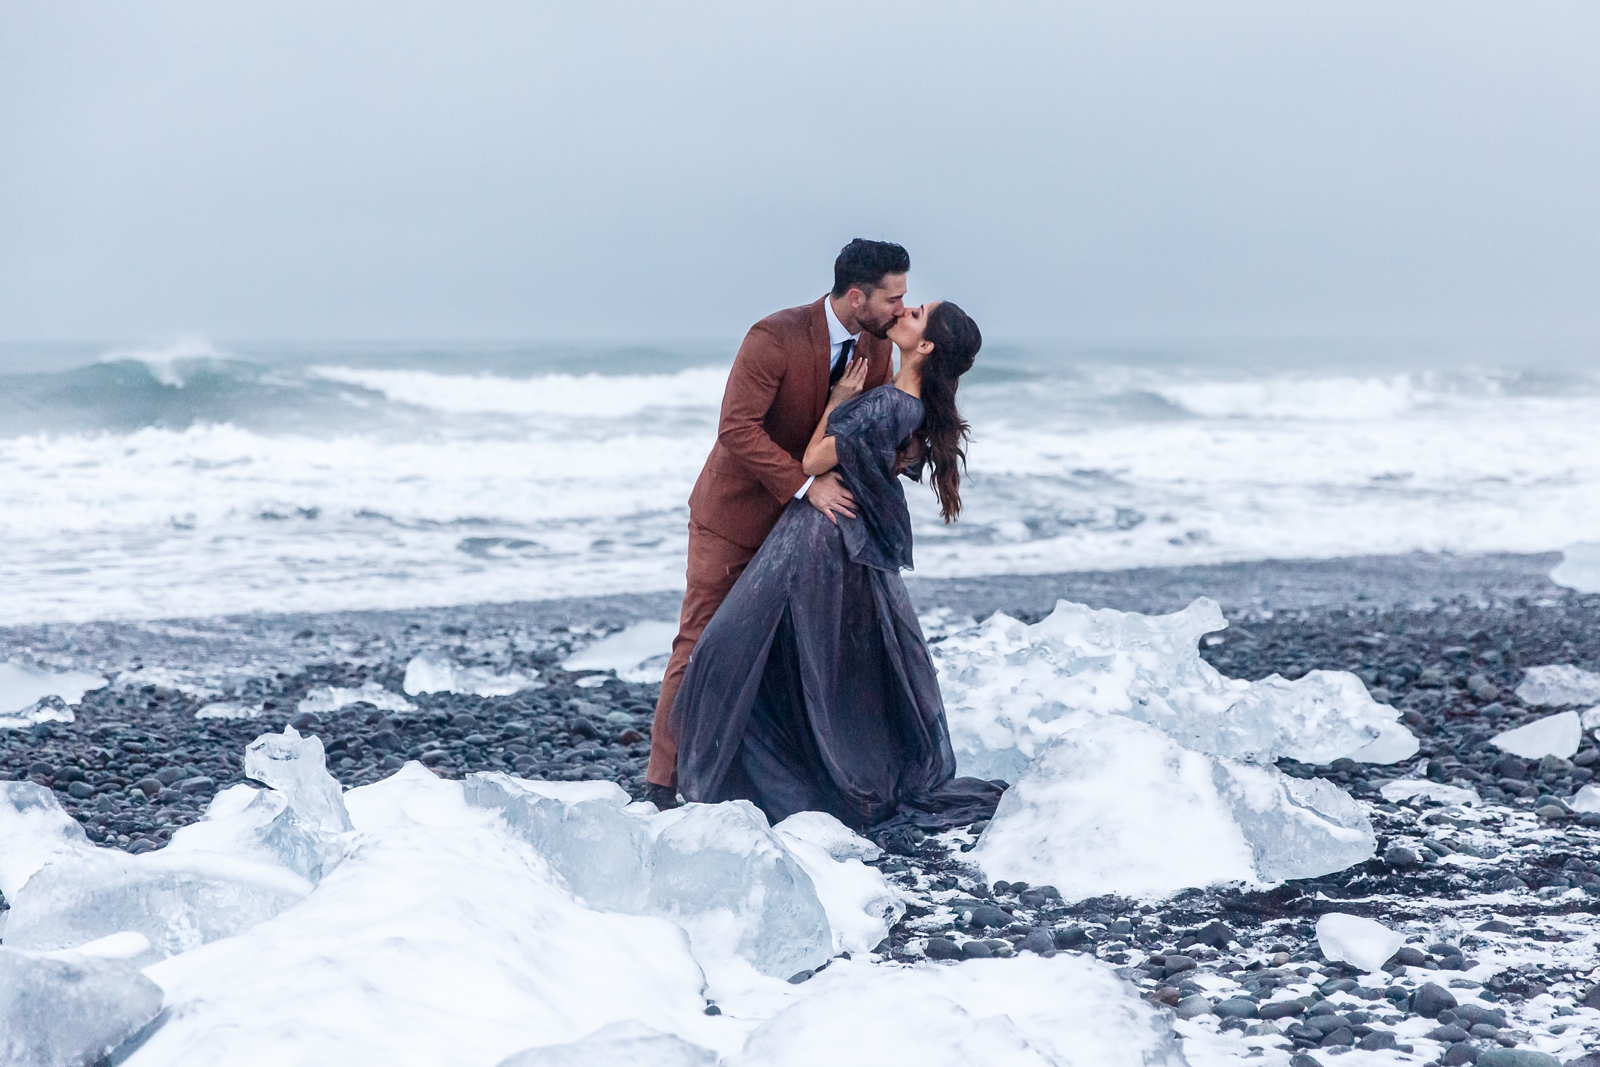 A couple kissing passionately at the moody winter seascape of Diamond Beach, Iceland